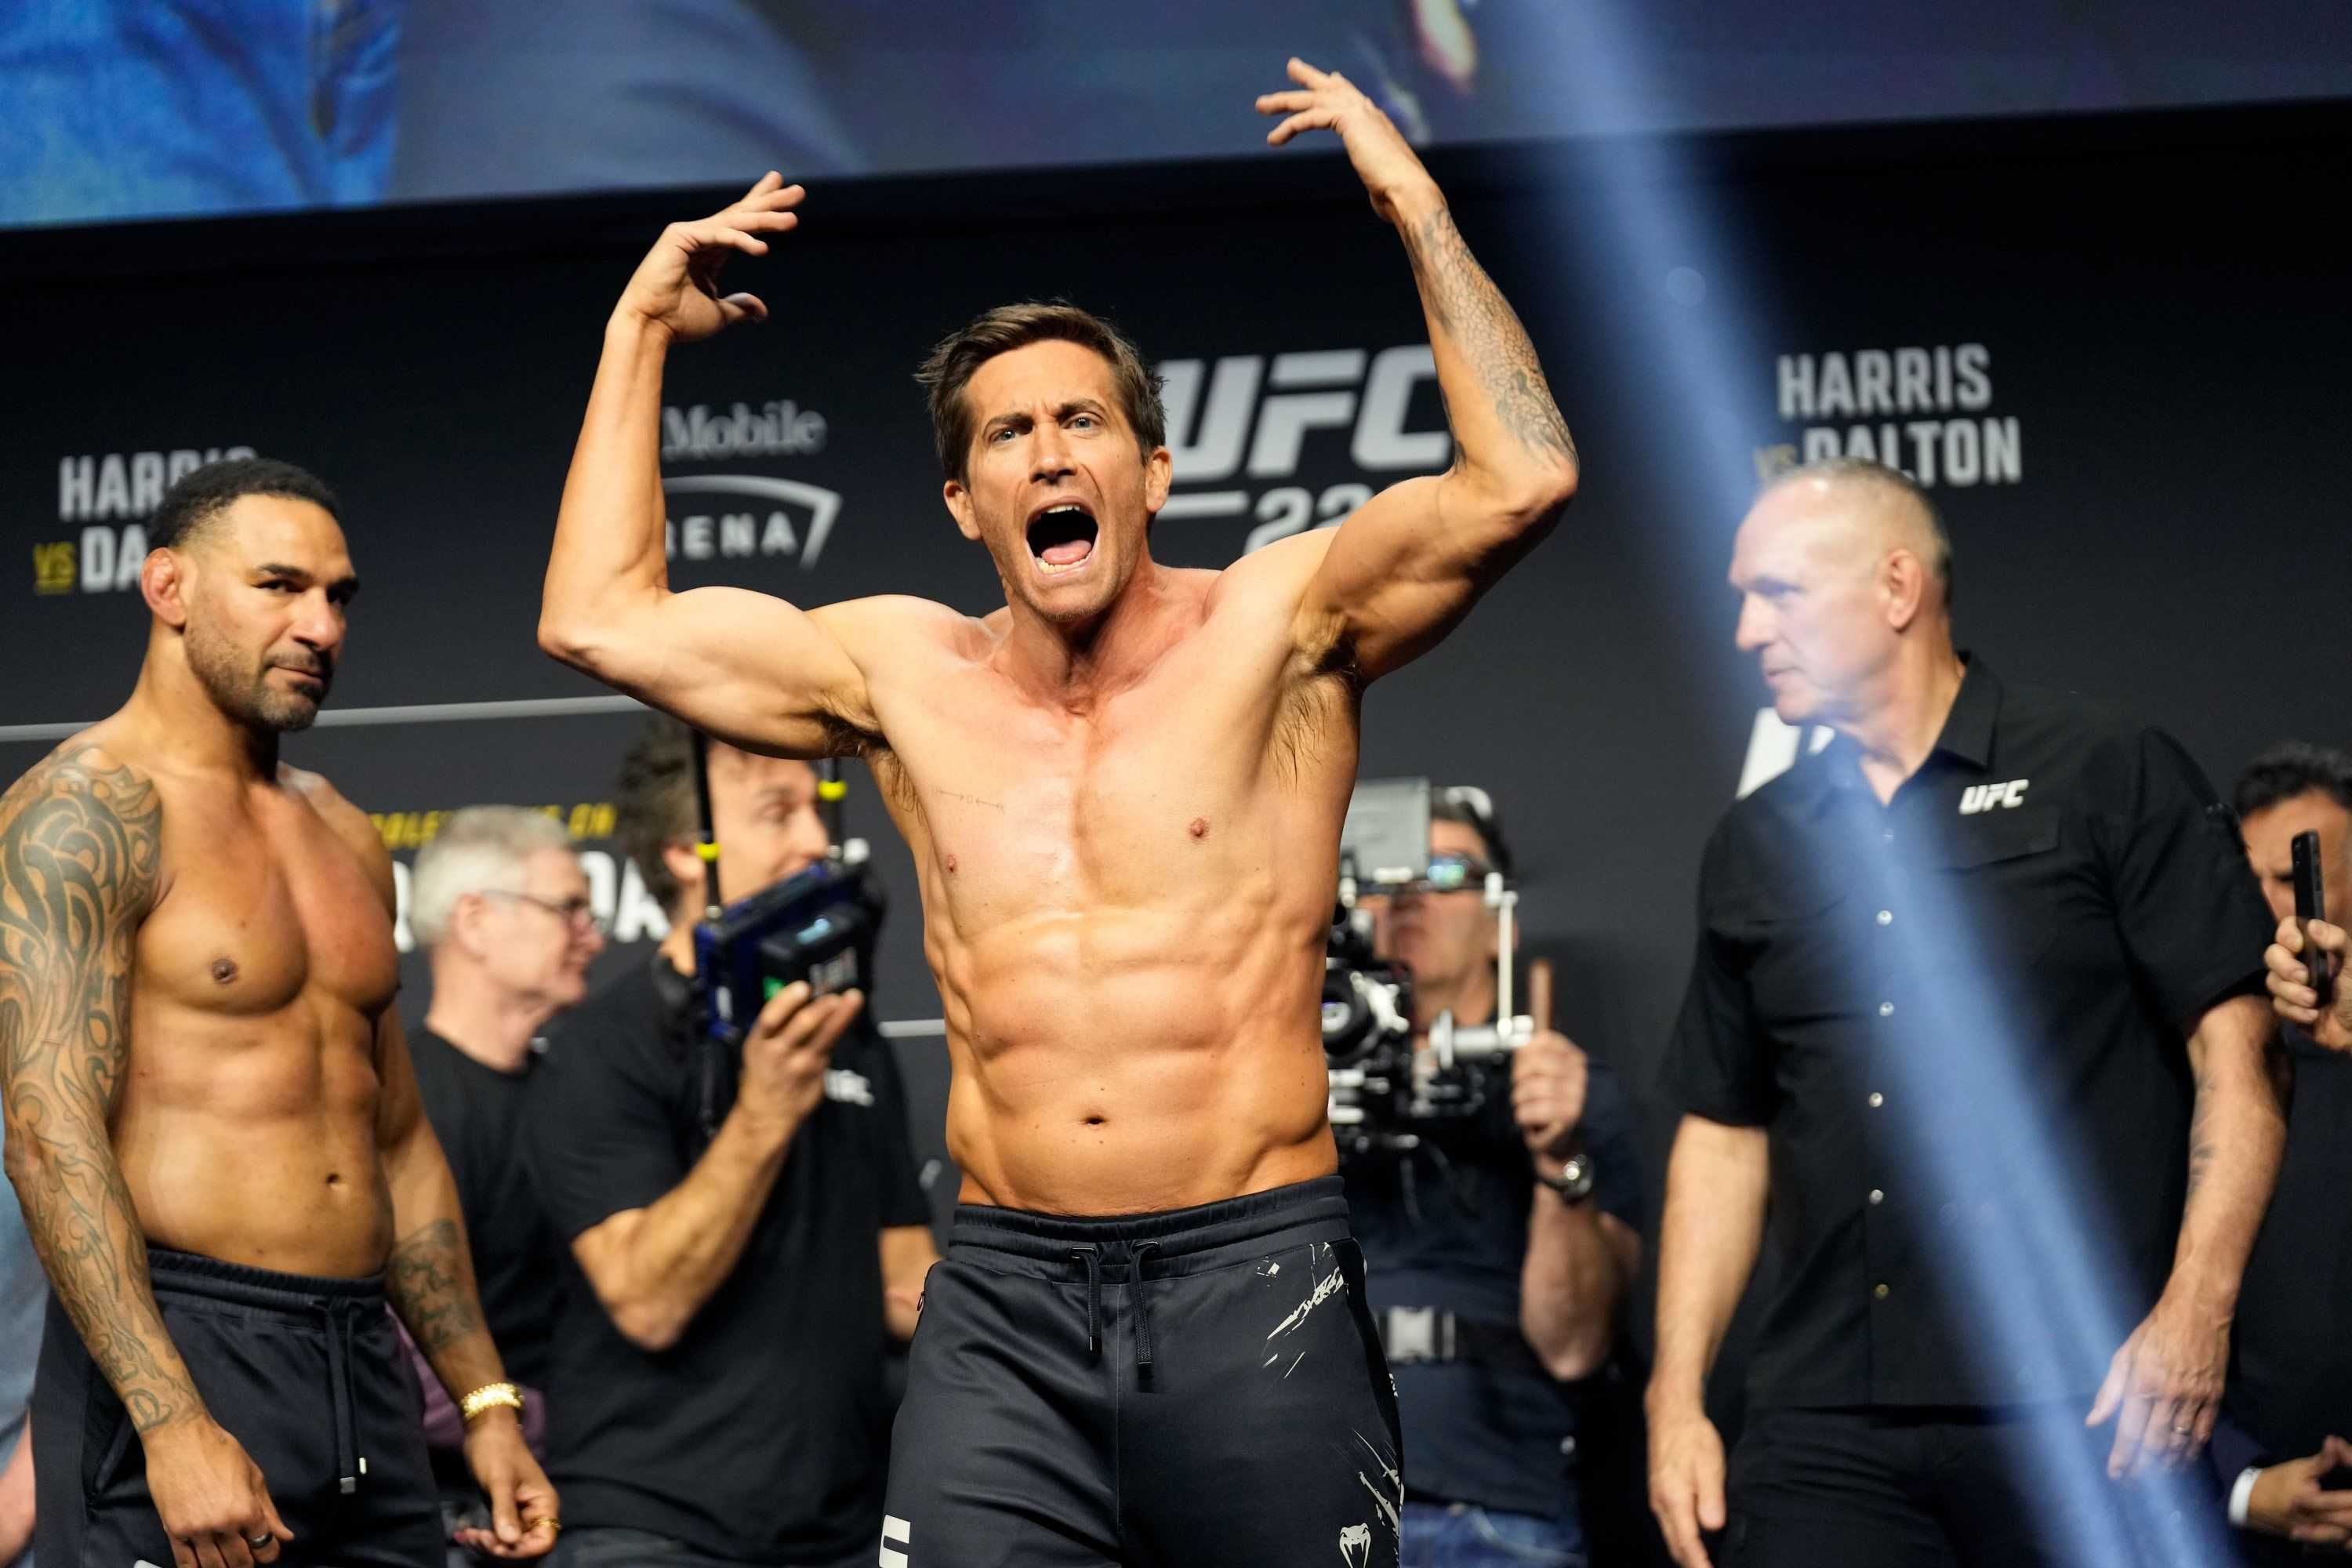 Jake Gyllenhaal’s shirtless antics at UFC 285 A flashback to the